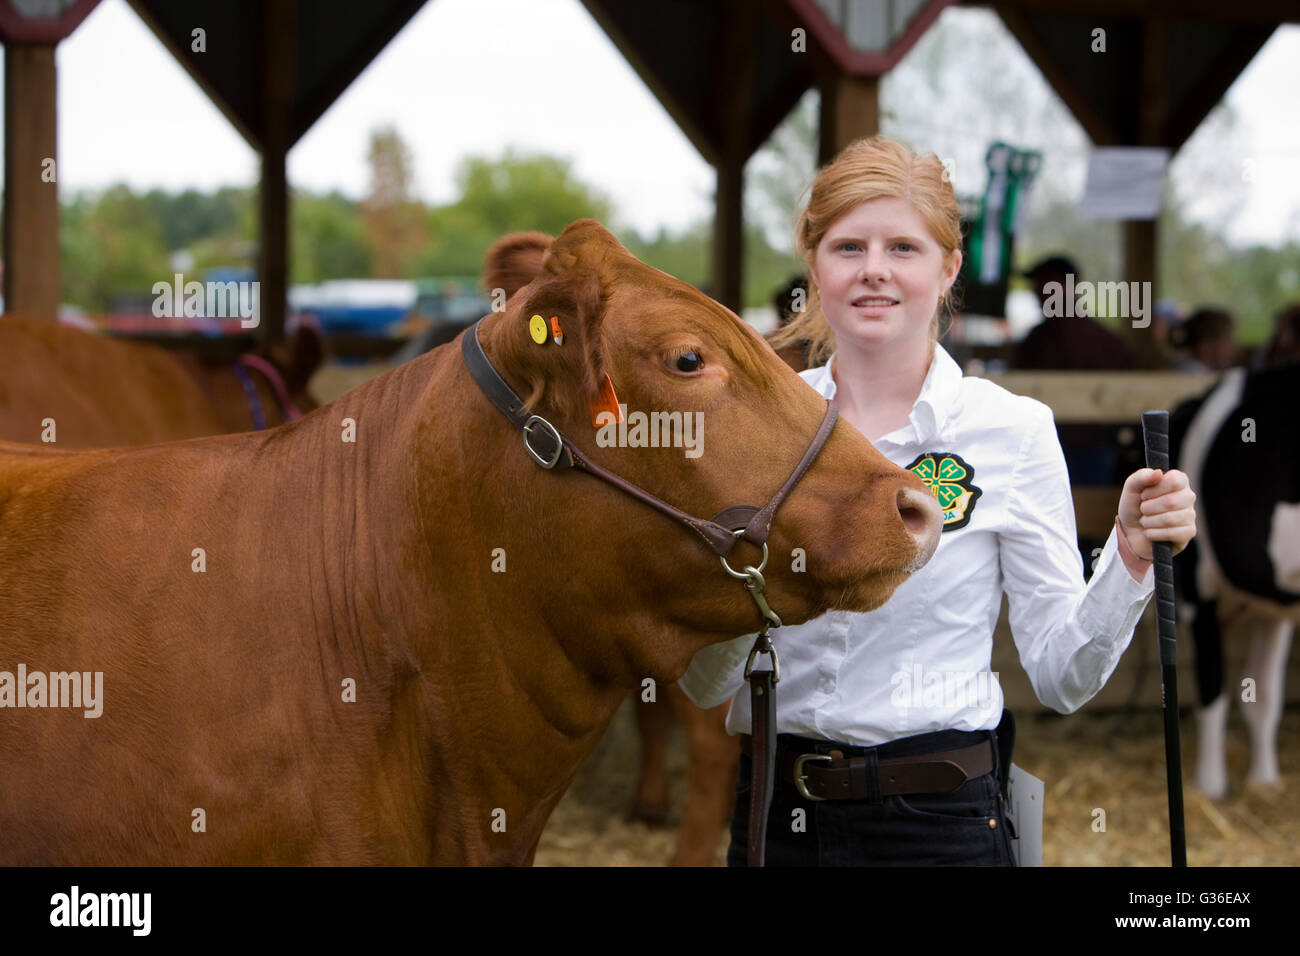 North America Canada Ontario teenage girl showing cow at agricultural fair Stock Photo